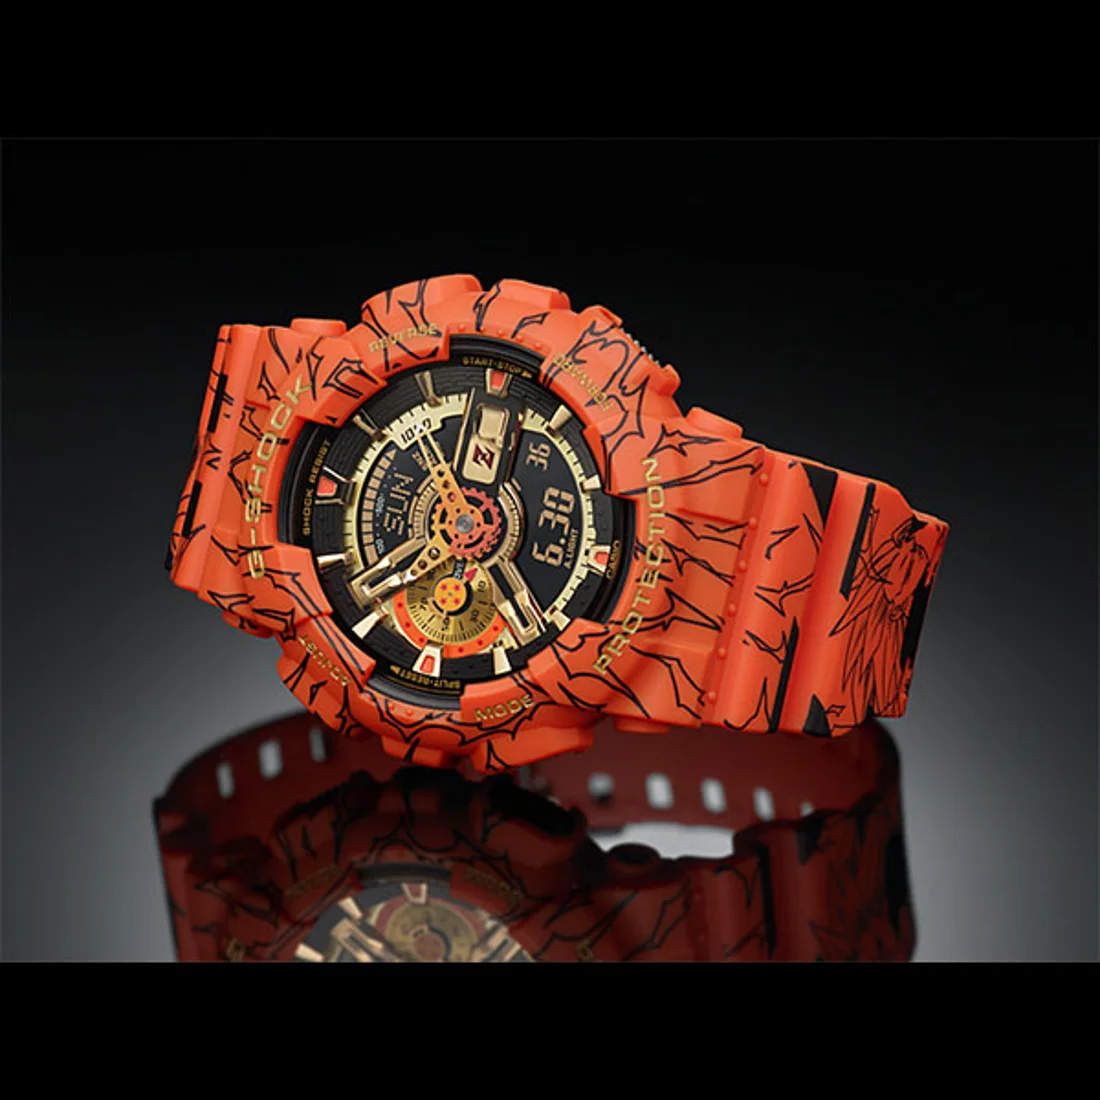 Buy G-SHOCK x Dragon Ball Z collaboration model - GA-110JDB-1A4JR from  Japan - Buy authentic Plus exclusive items from Japan | ZenPlus